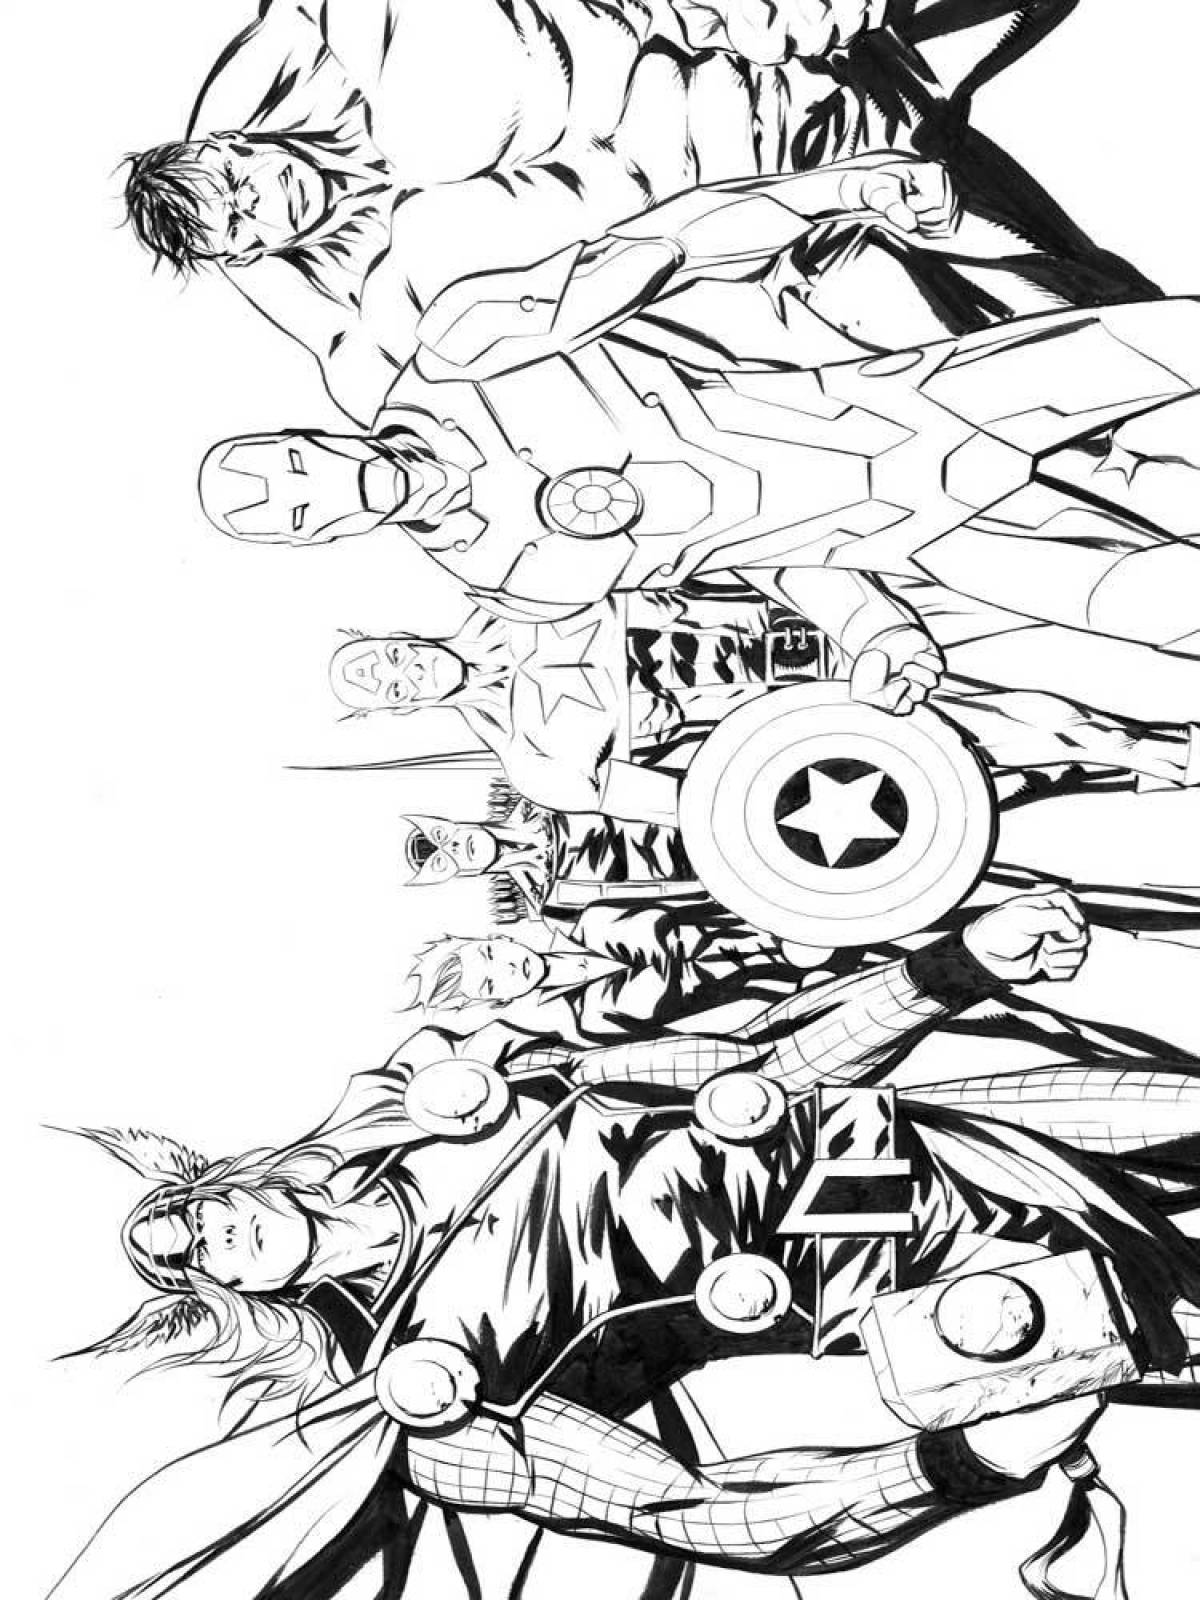 Tokyo avengers playful coloring page